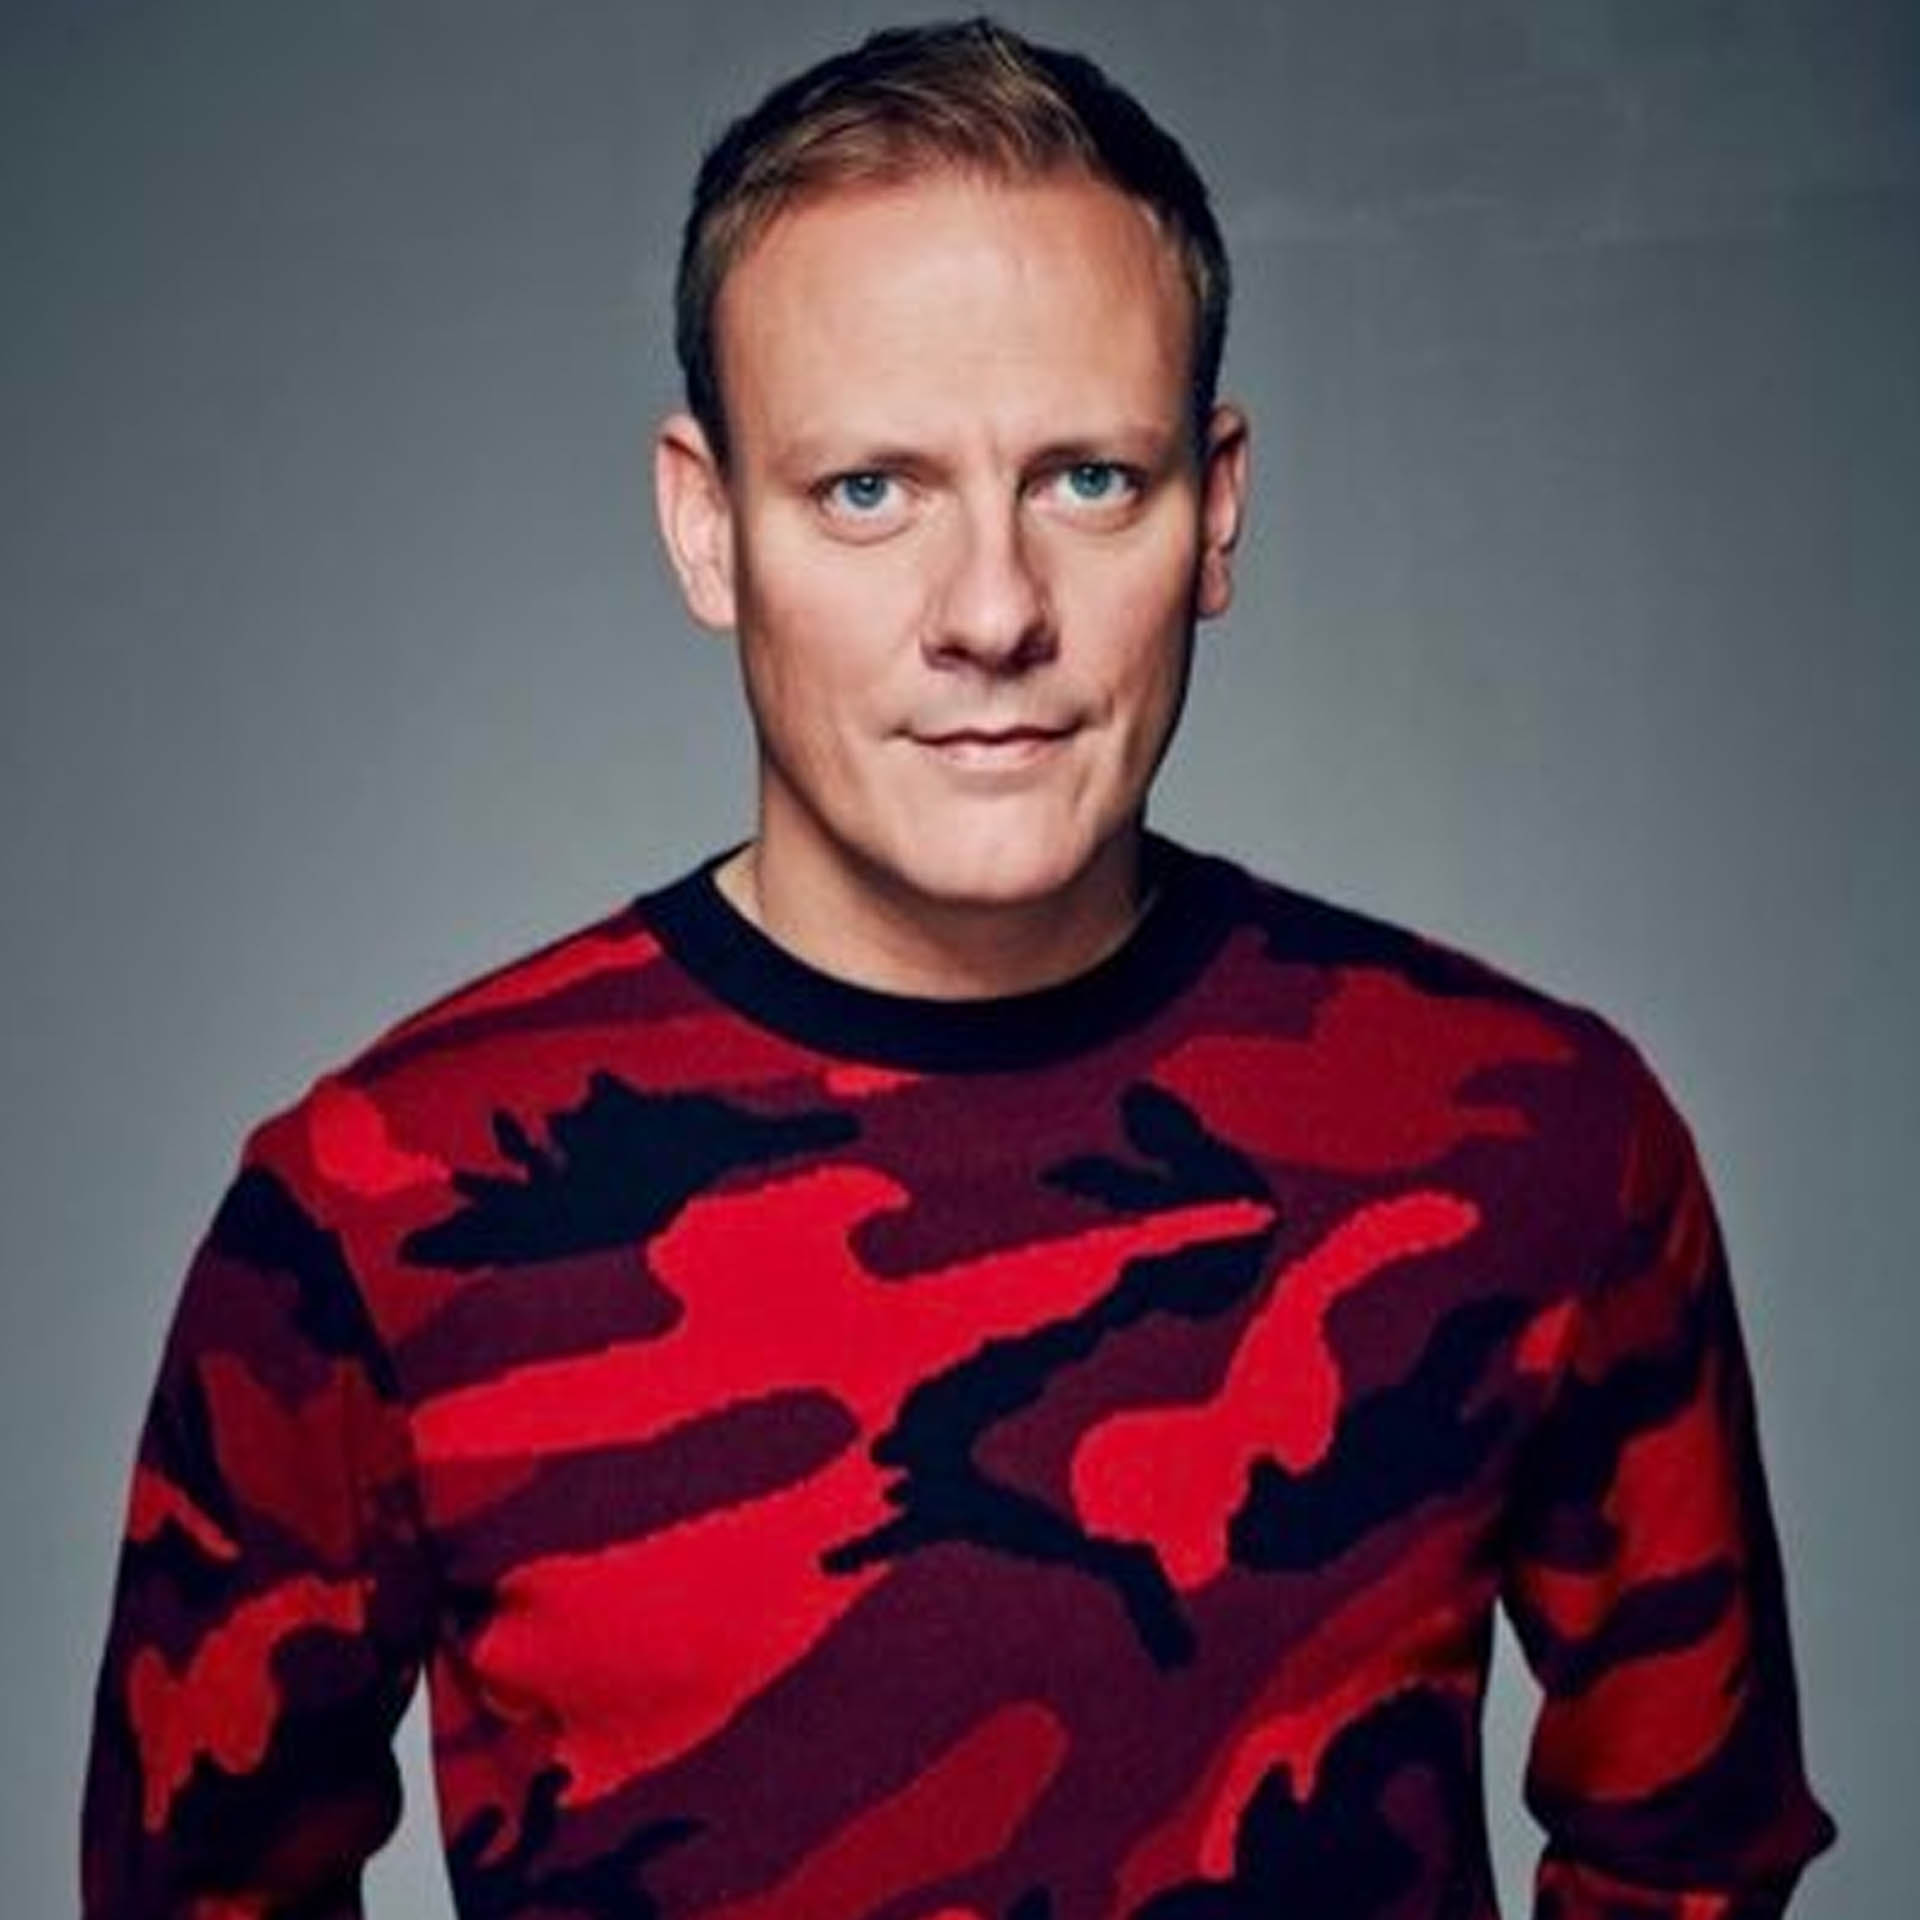 EVENTS THAT MADE ME - Antony Cotton